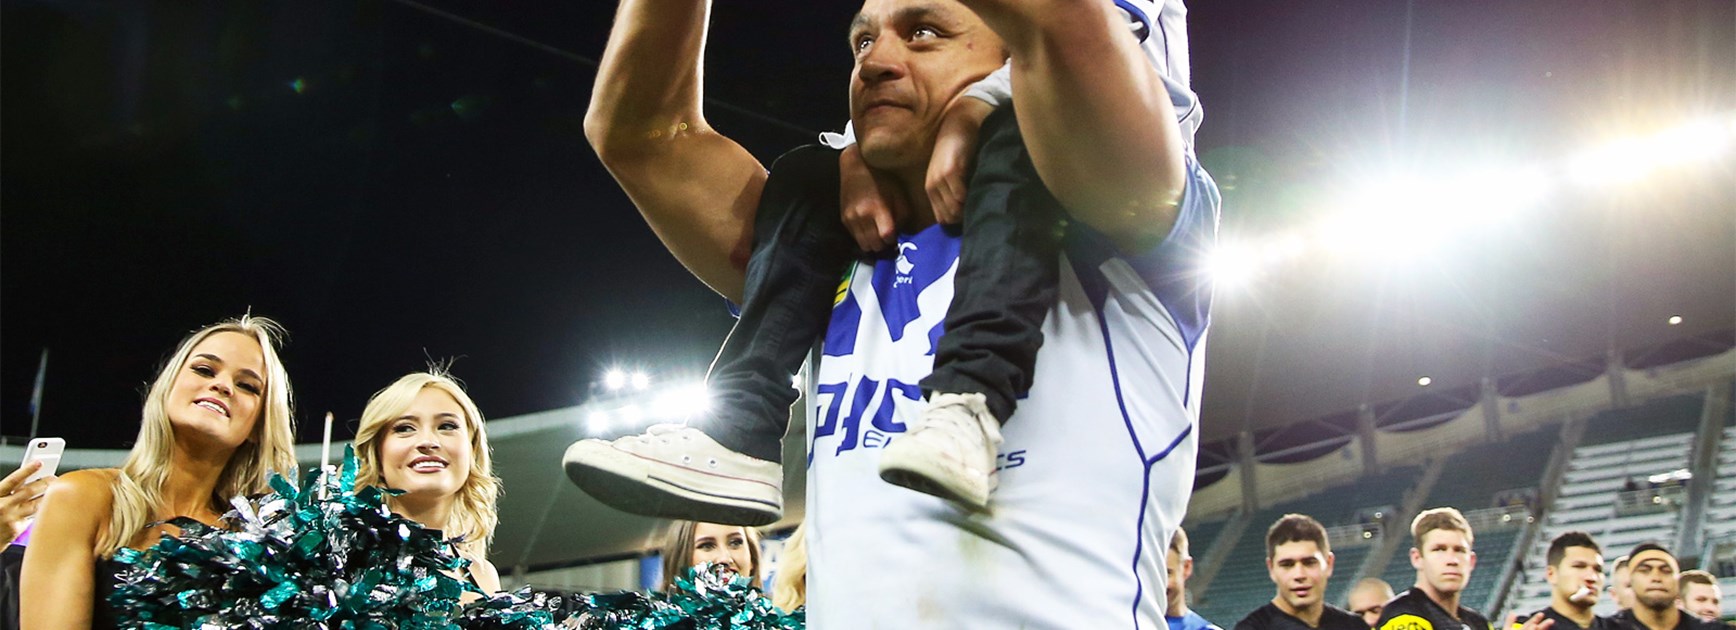 Sam Perrett farewells the crowd after the Bulldogs' finals loss to Penrith.